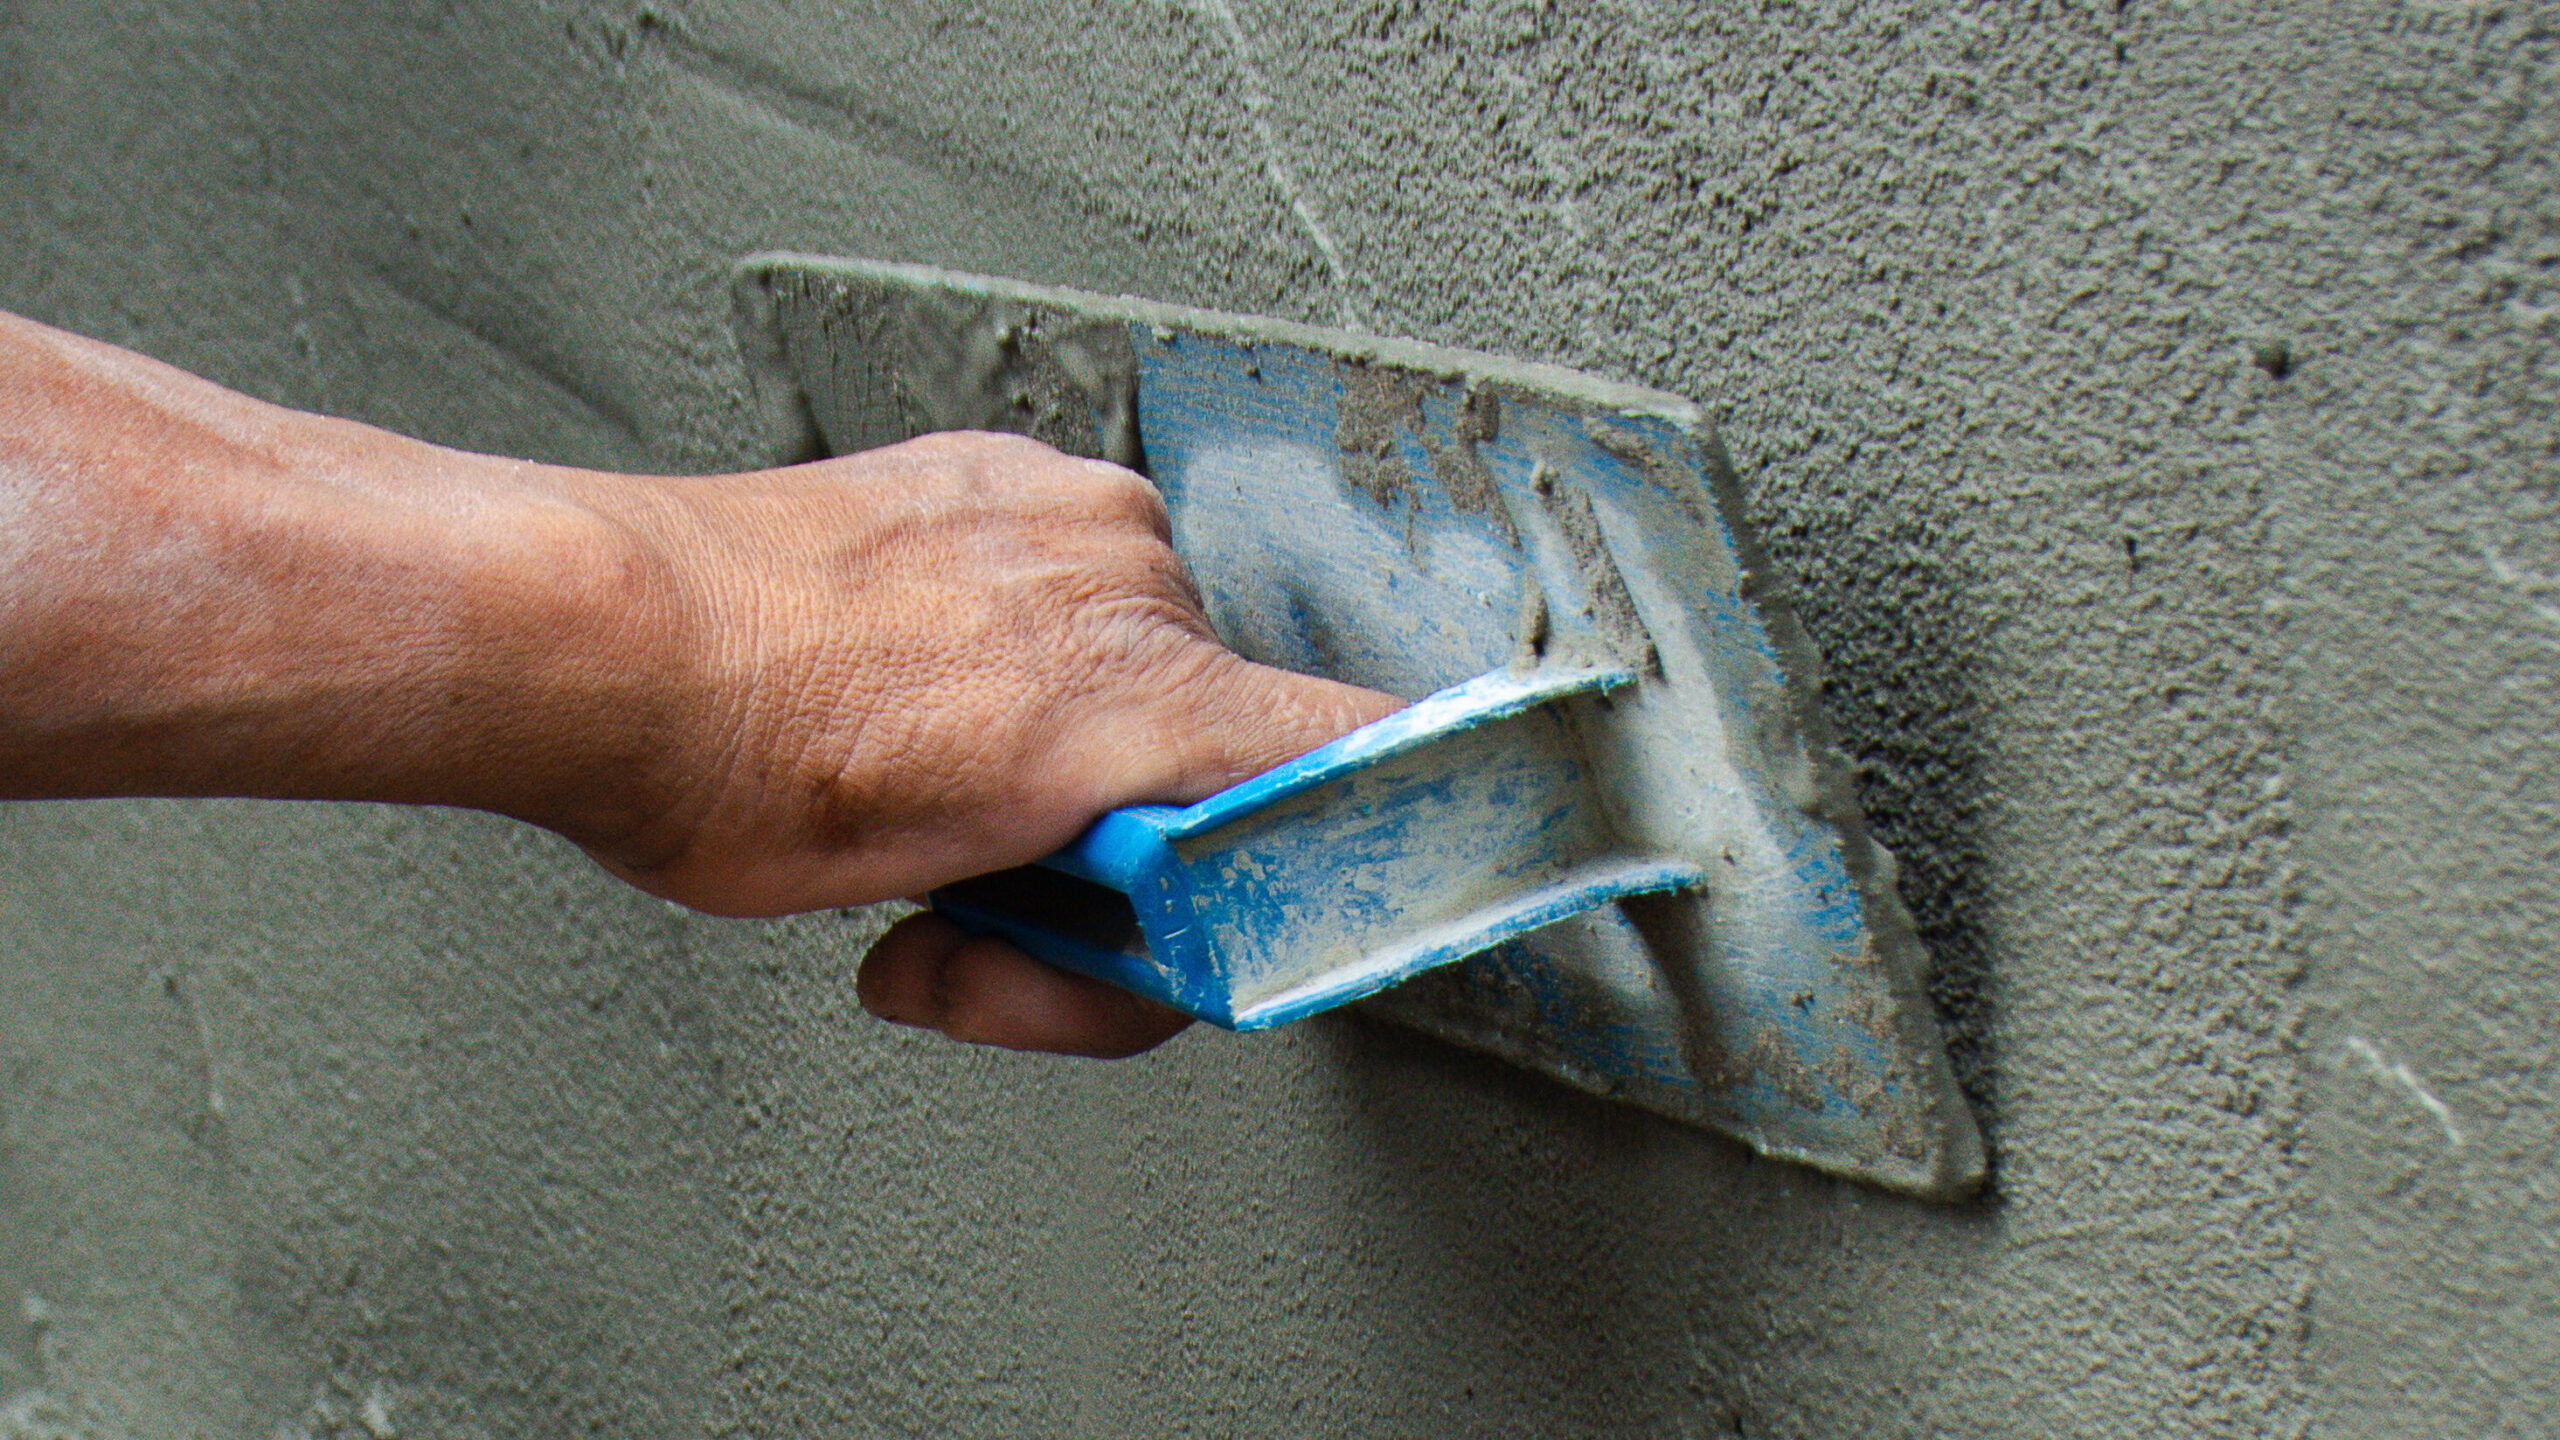 Construction workers in industrial buildings are plastering to build walls. Background image Industrial workers with plastering tools. Home improvement Professional quality concepts of the construction industry with skilled workers.